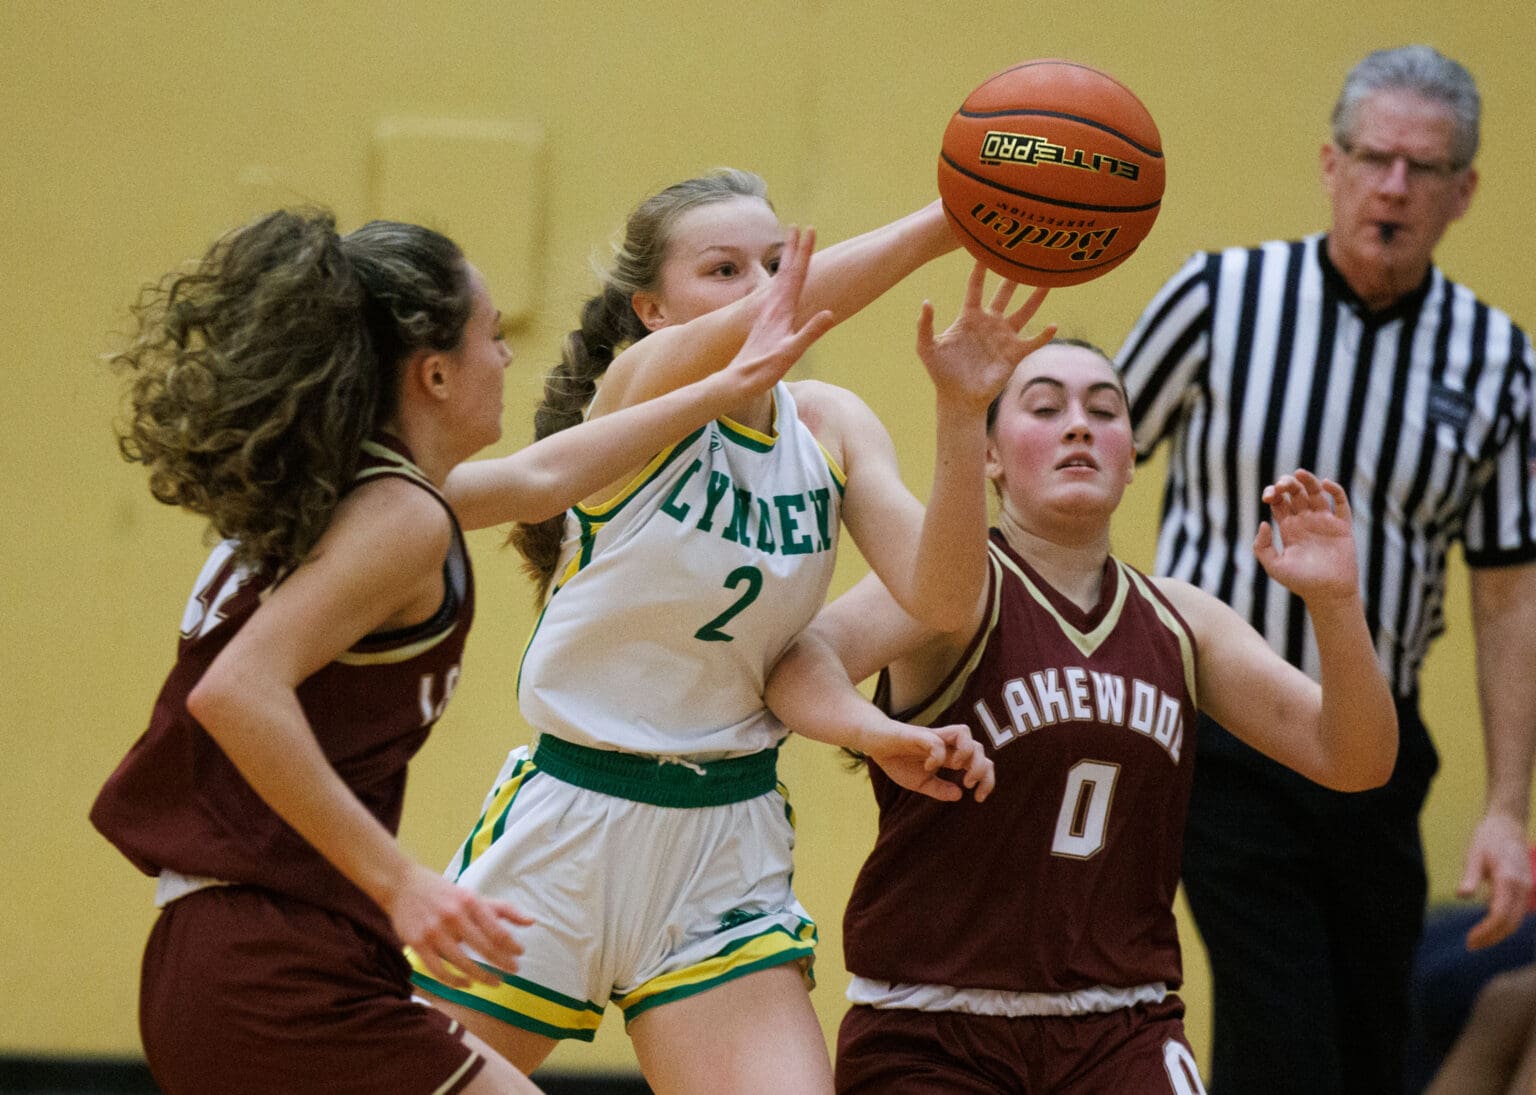 Lynden’s Kalanie Newcomb steals the ball from two Lakewood players as a referee watches closely.